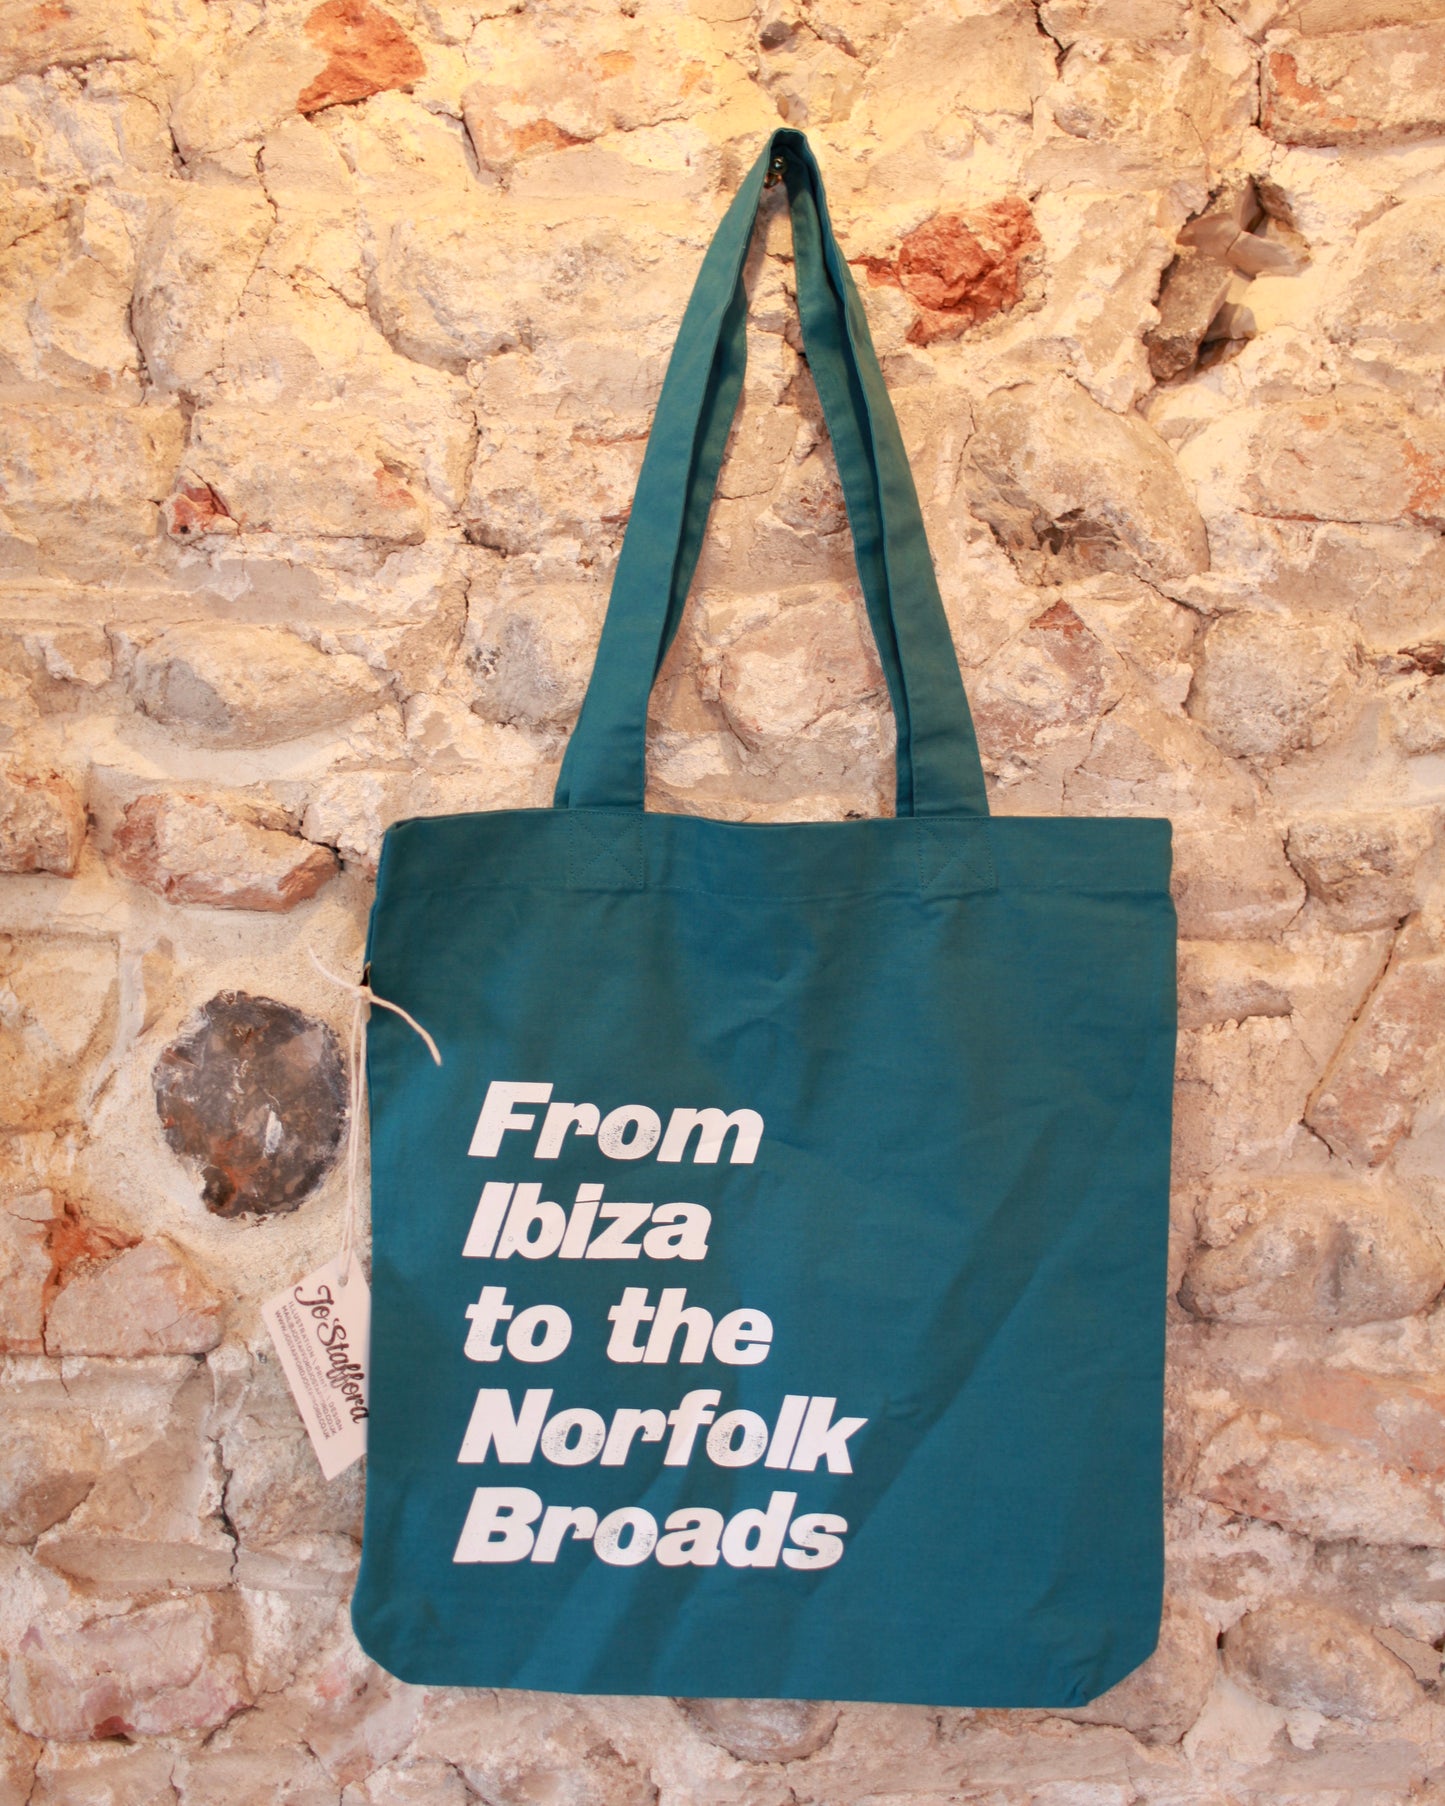 From Ibiza to the Norfolk Broads - Cotton tote bag